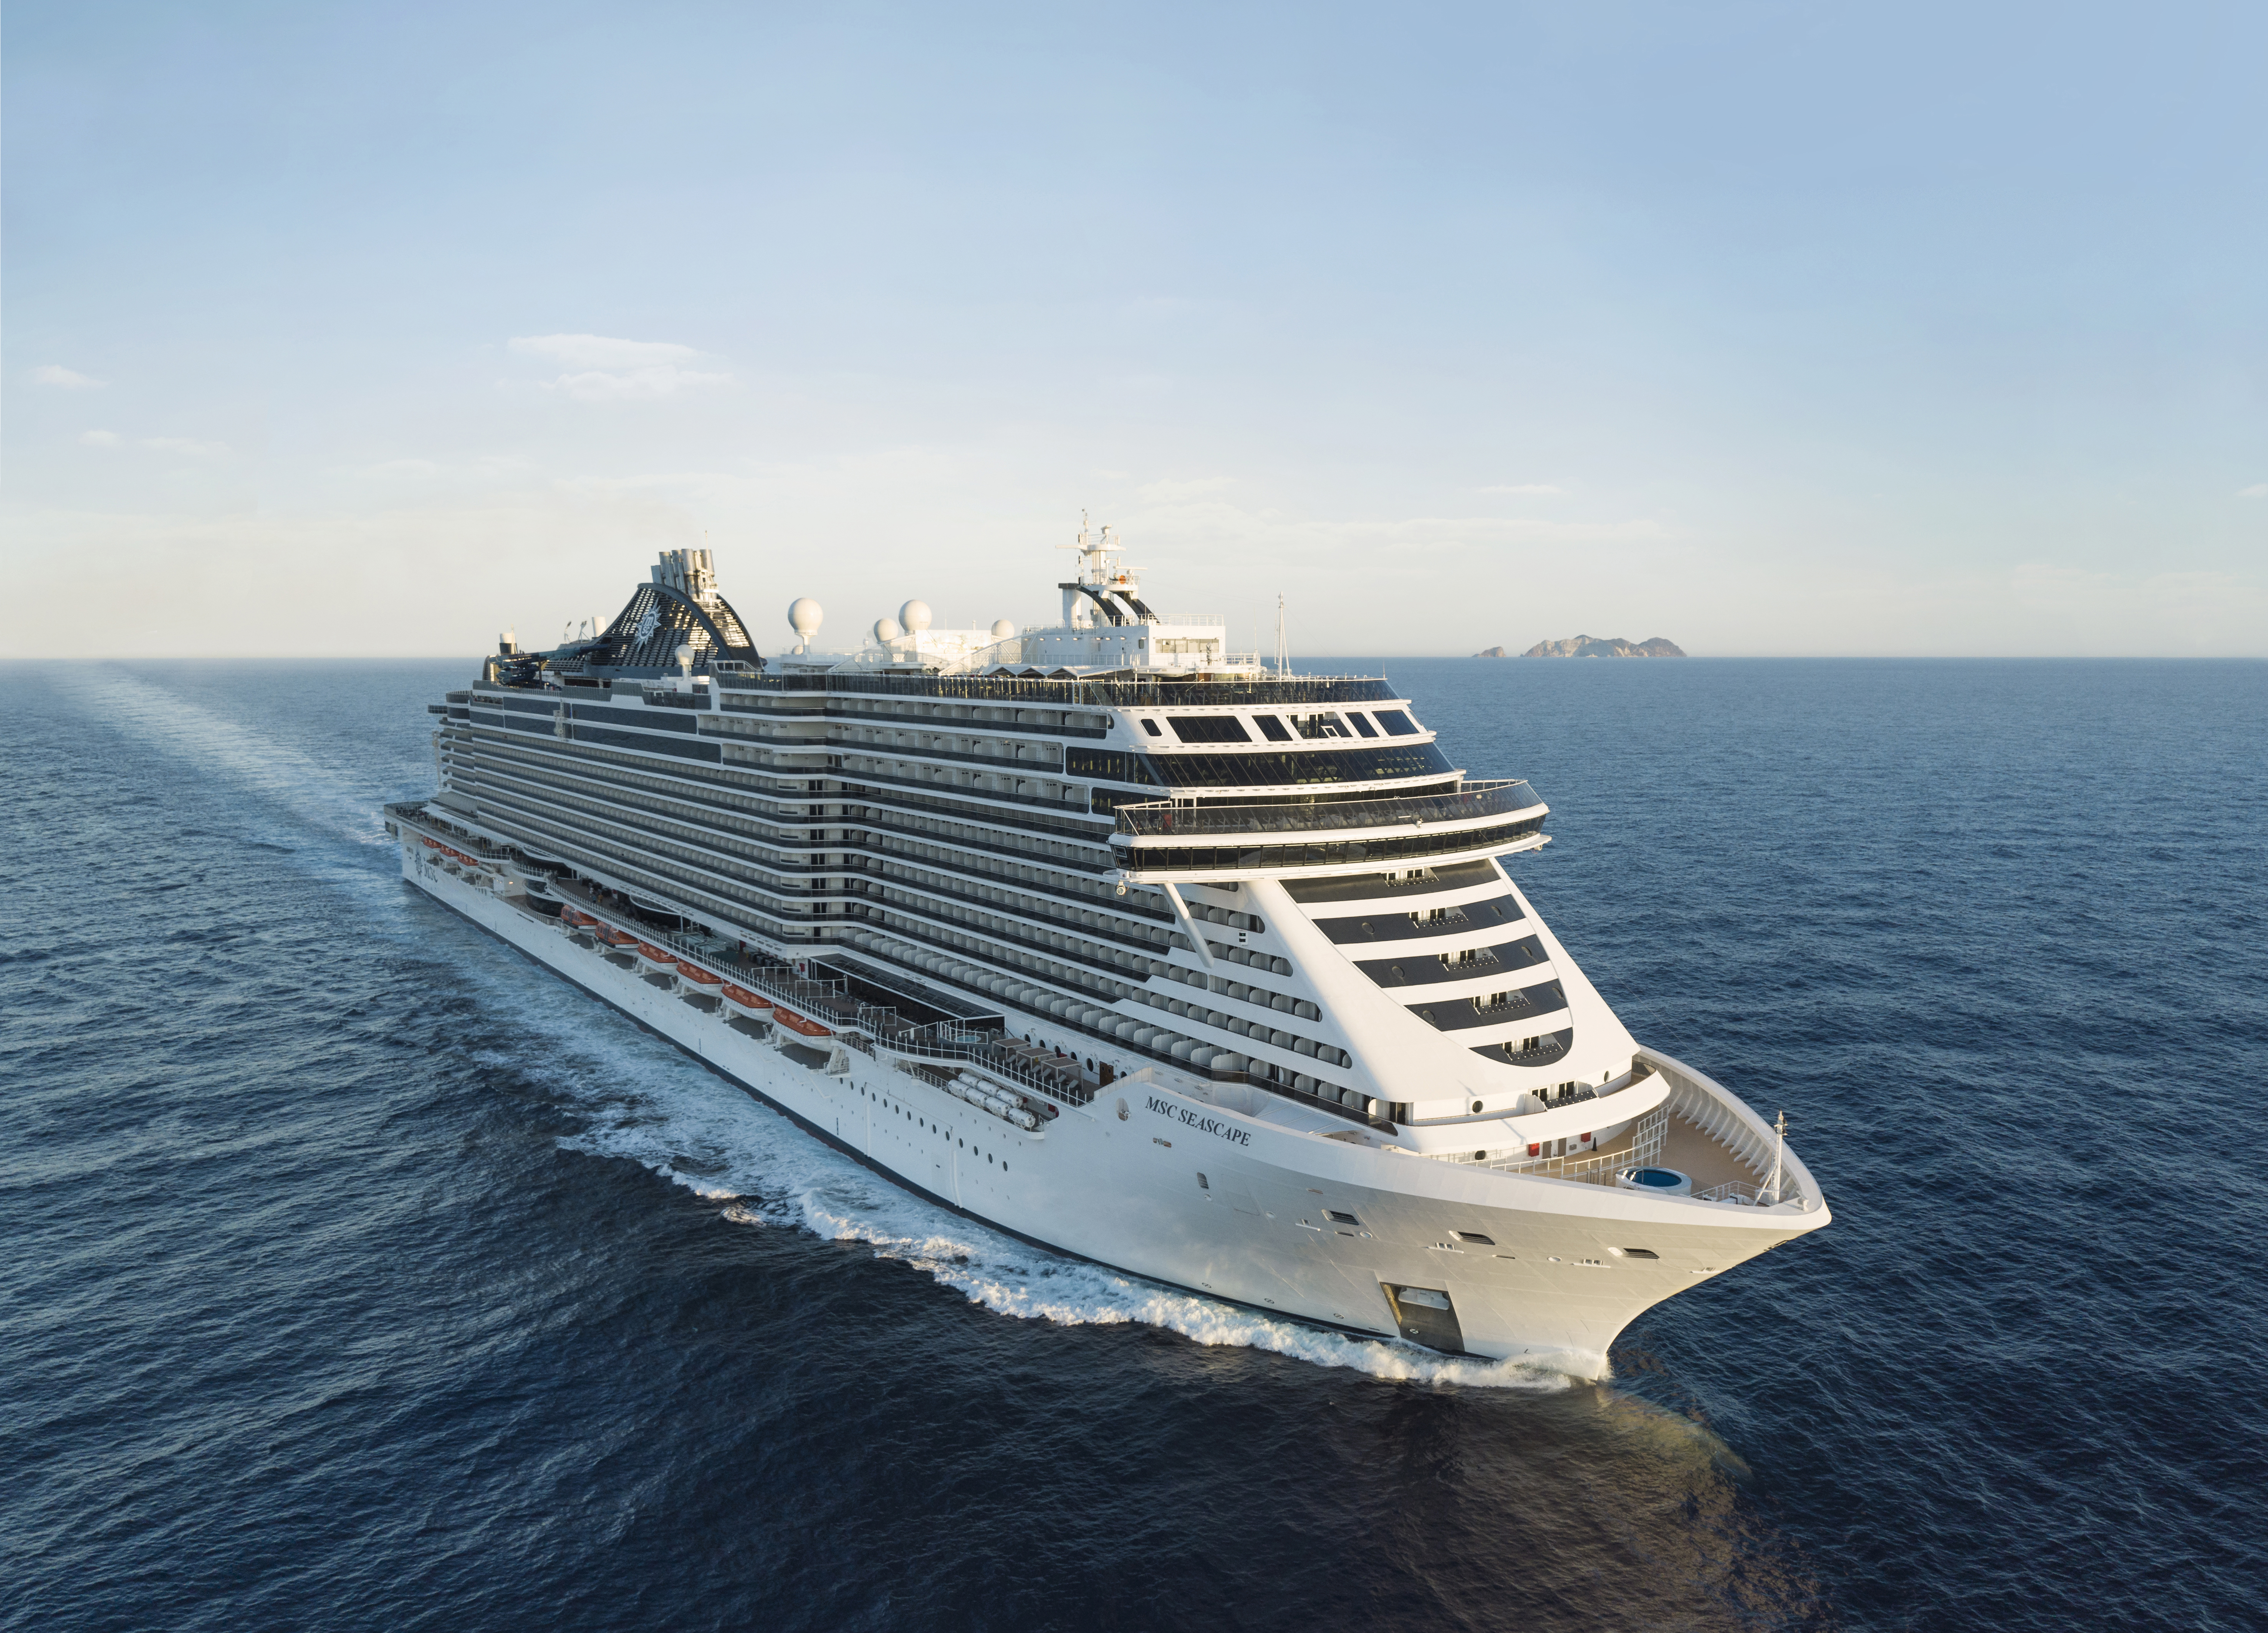 Cruise giant MSC has launched a new flash sale with discounts of £250 per person for UK customers only